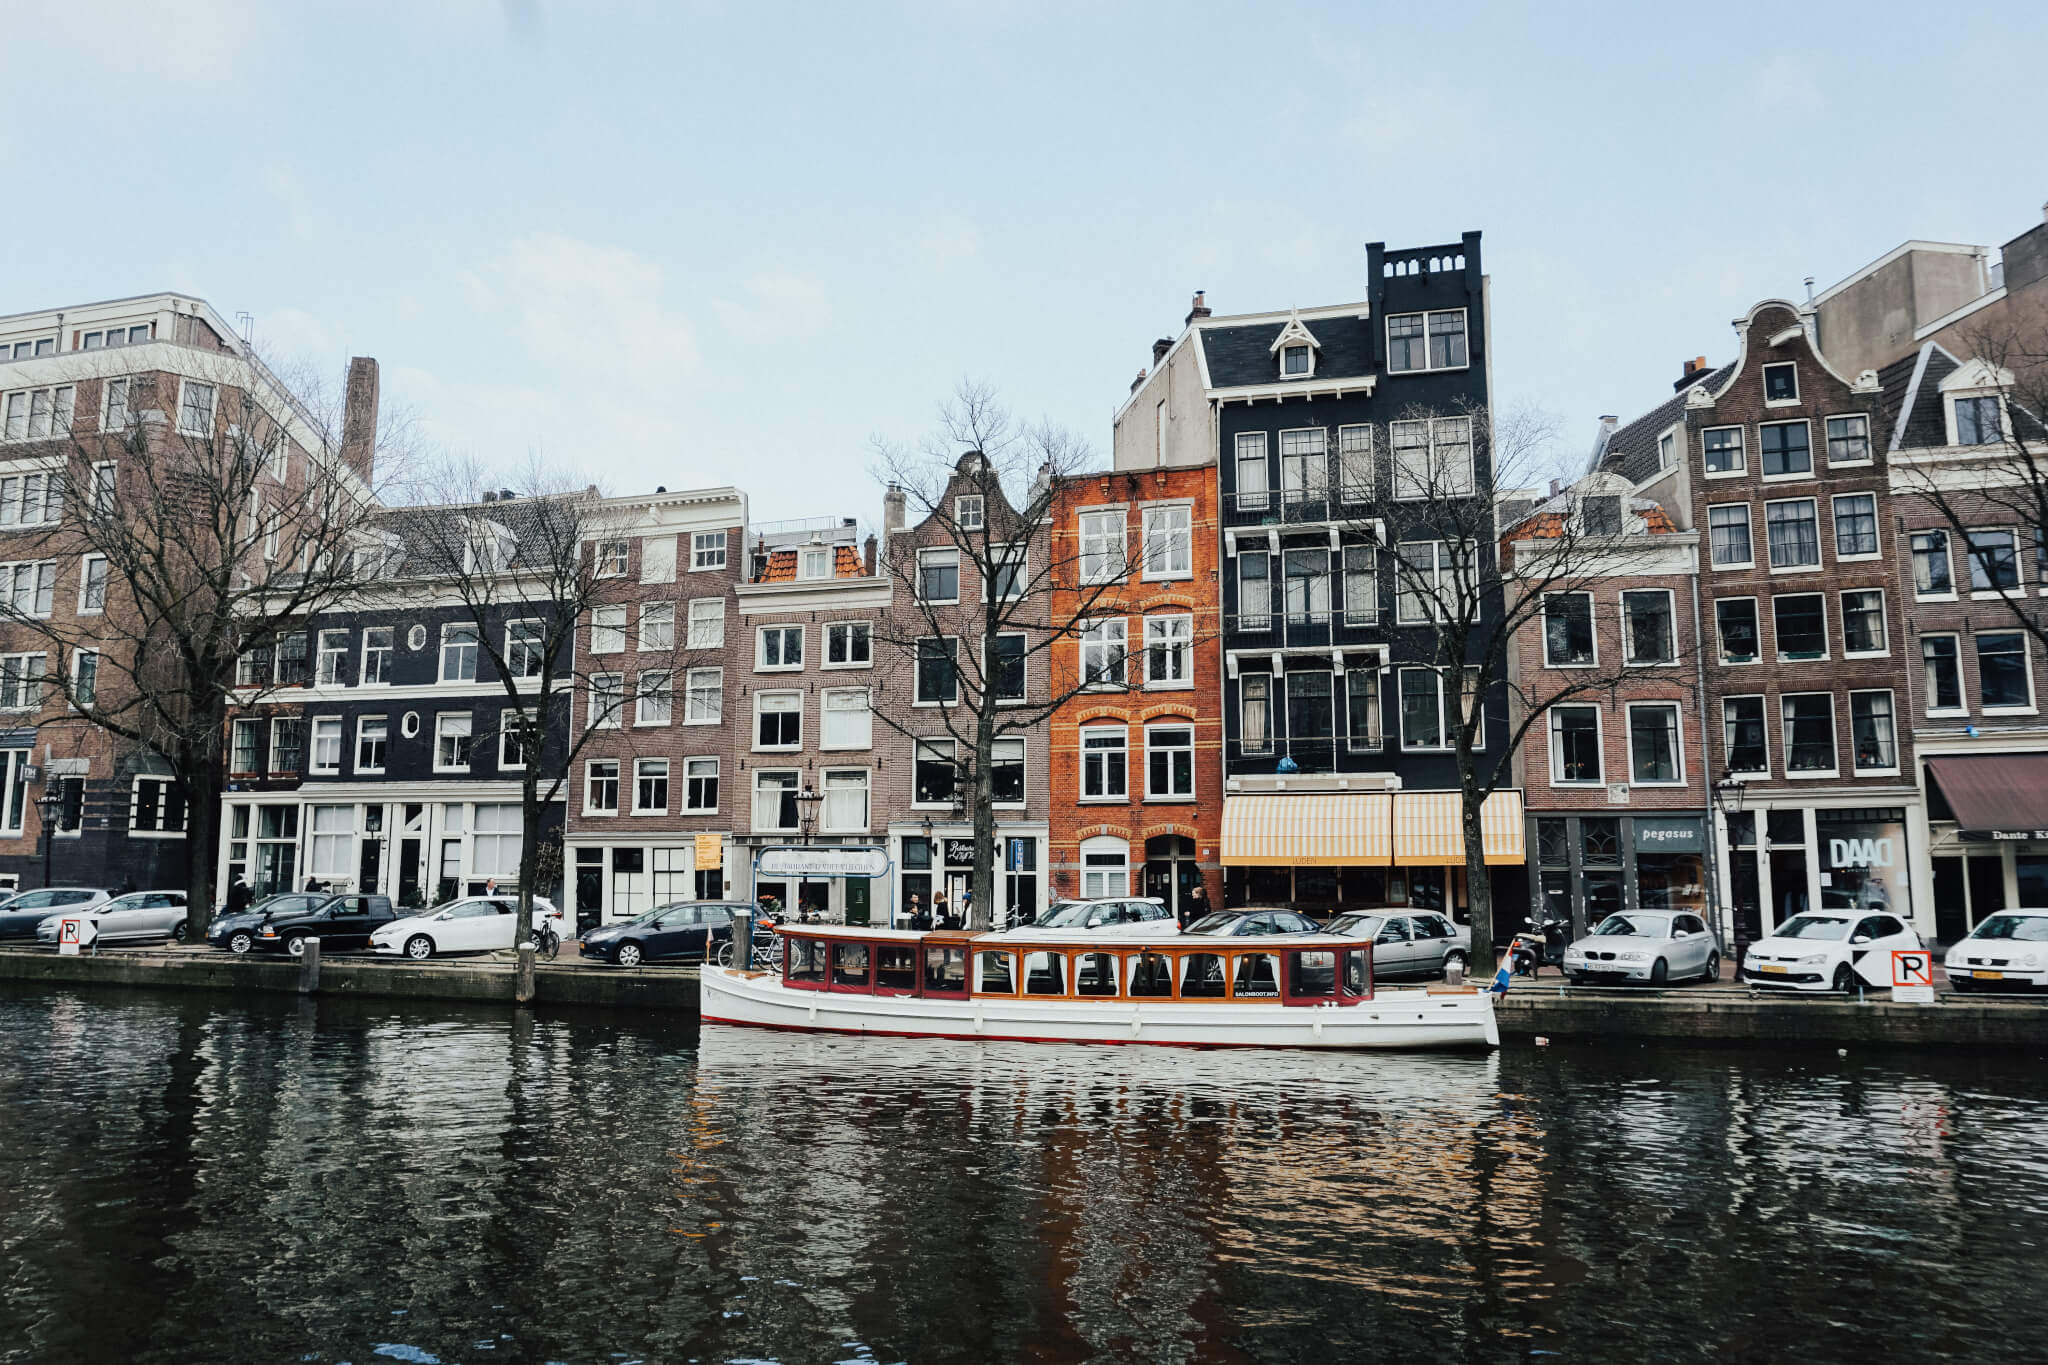 Pexels stock image of Amsterdam row of houses behind canal with boat